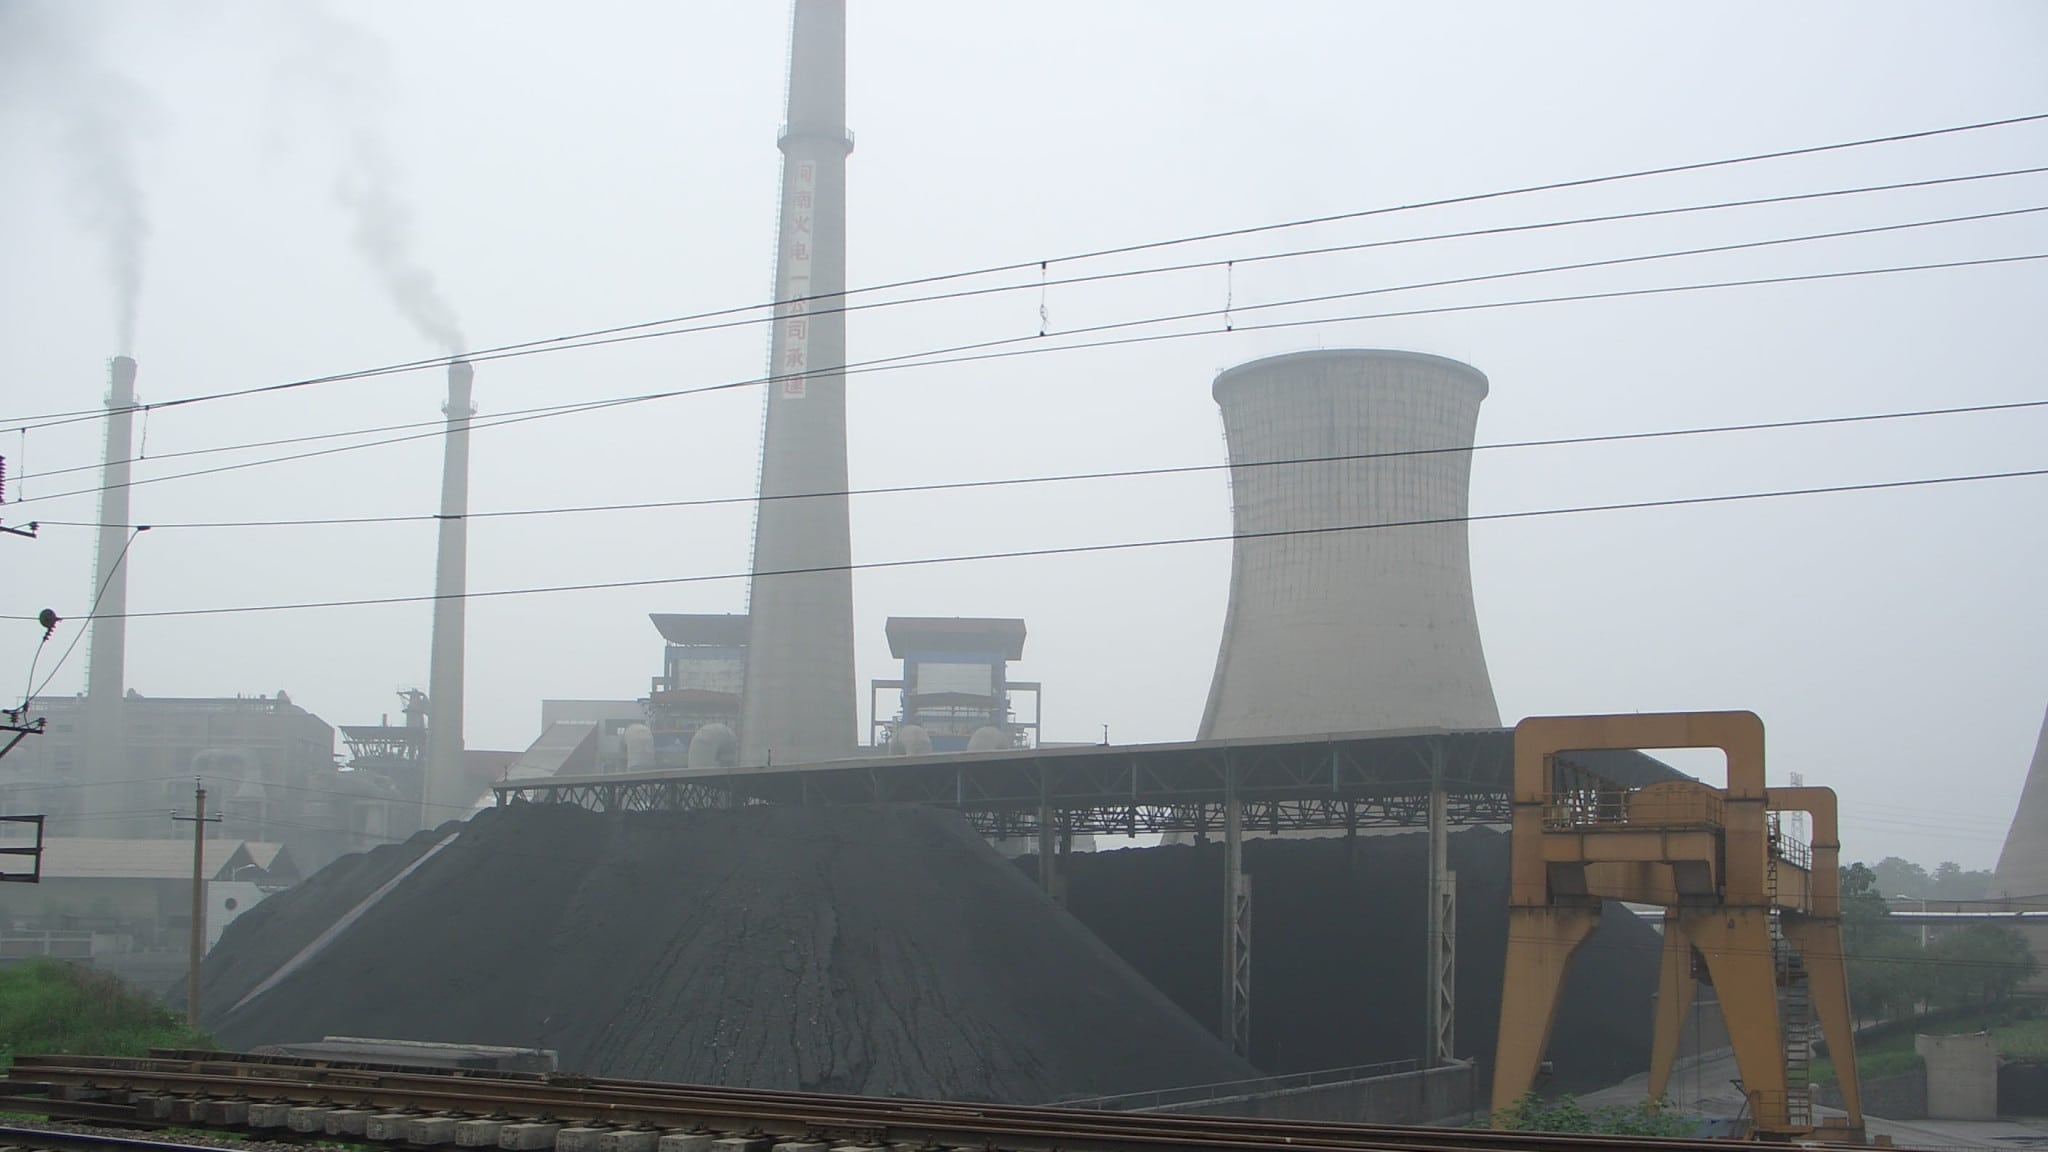 Despite Policy Shifts, China Faces Huge Coal-Fired Overcapacity